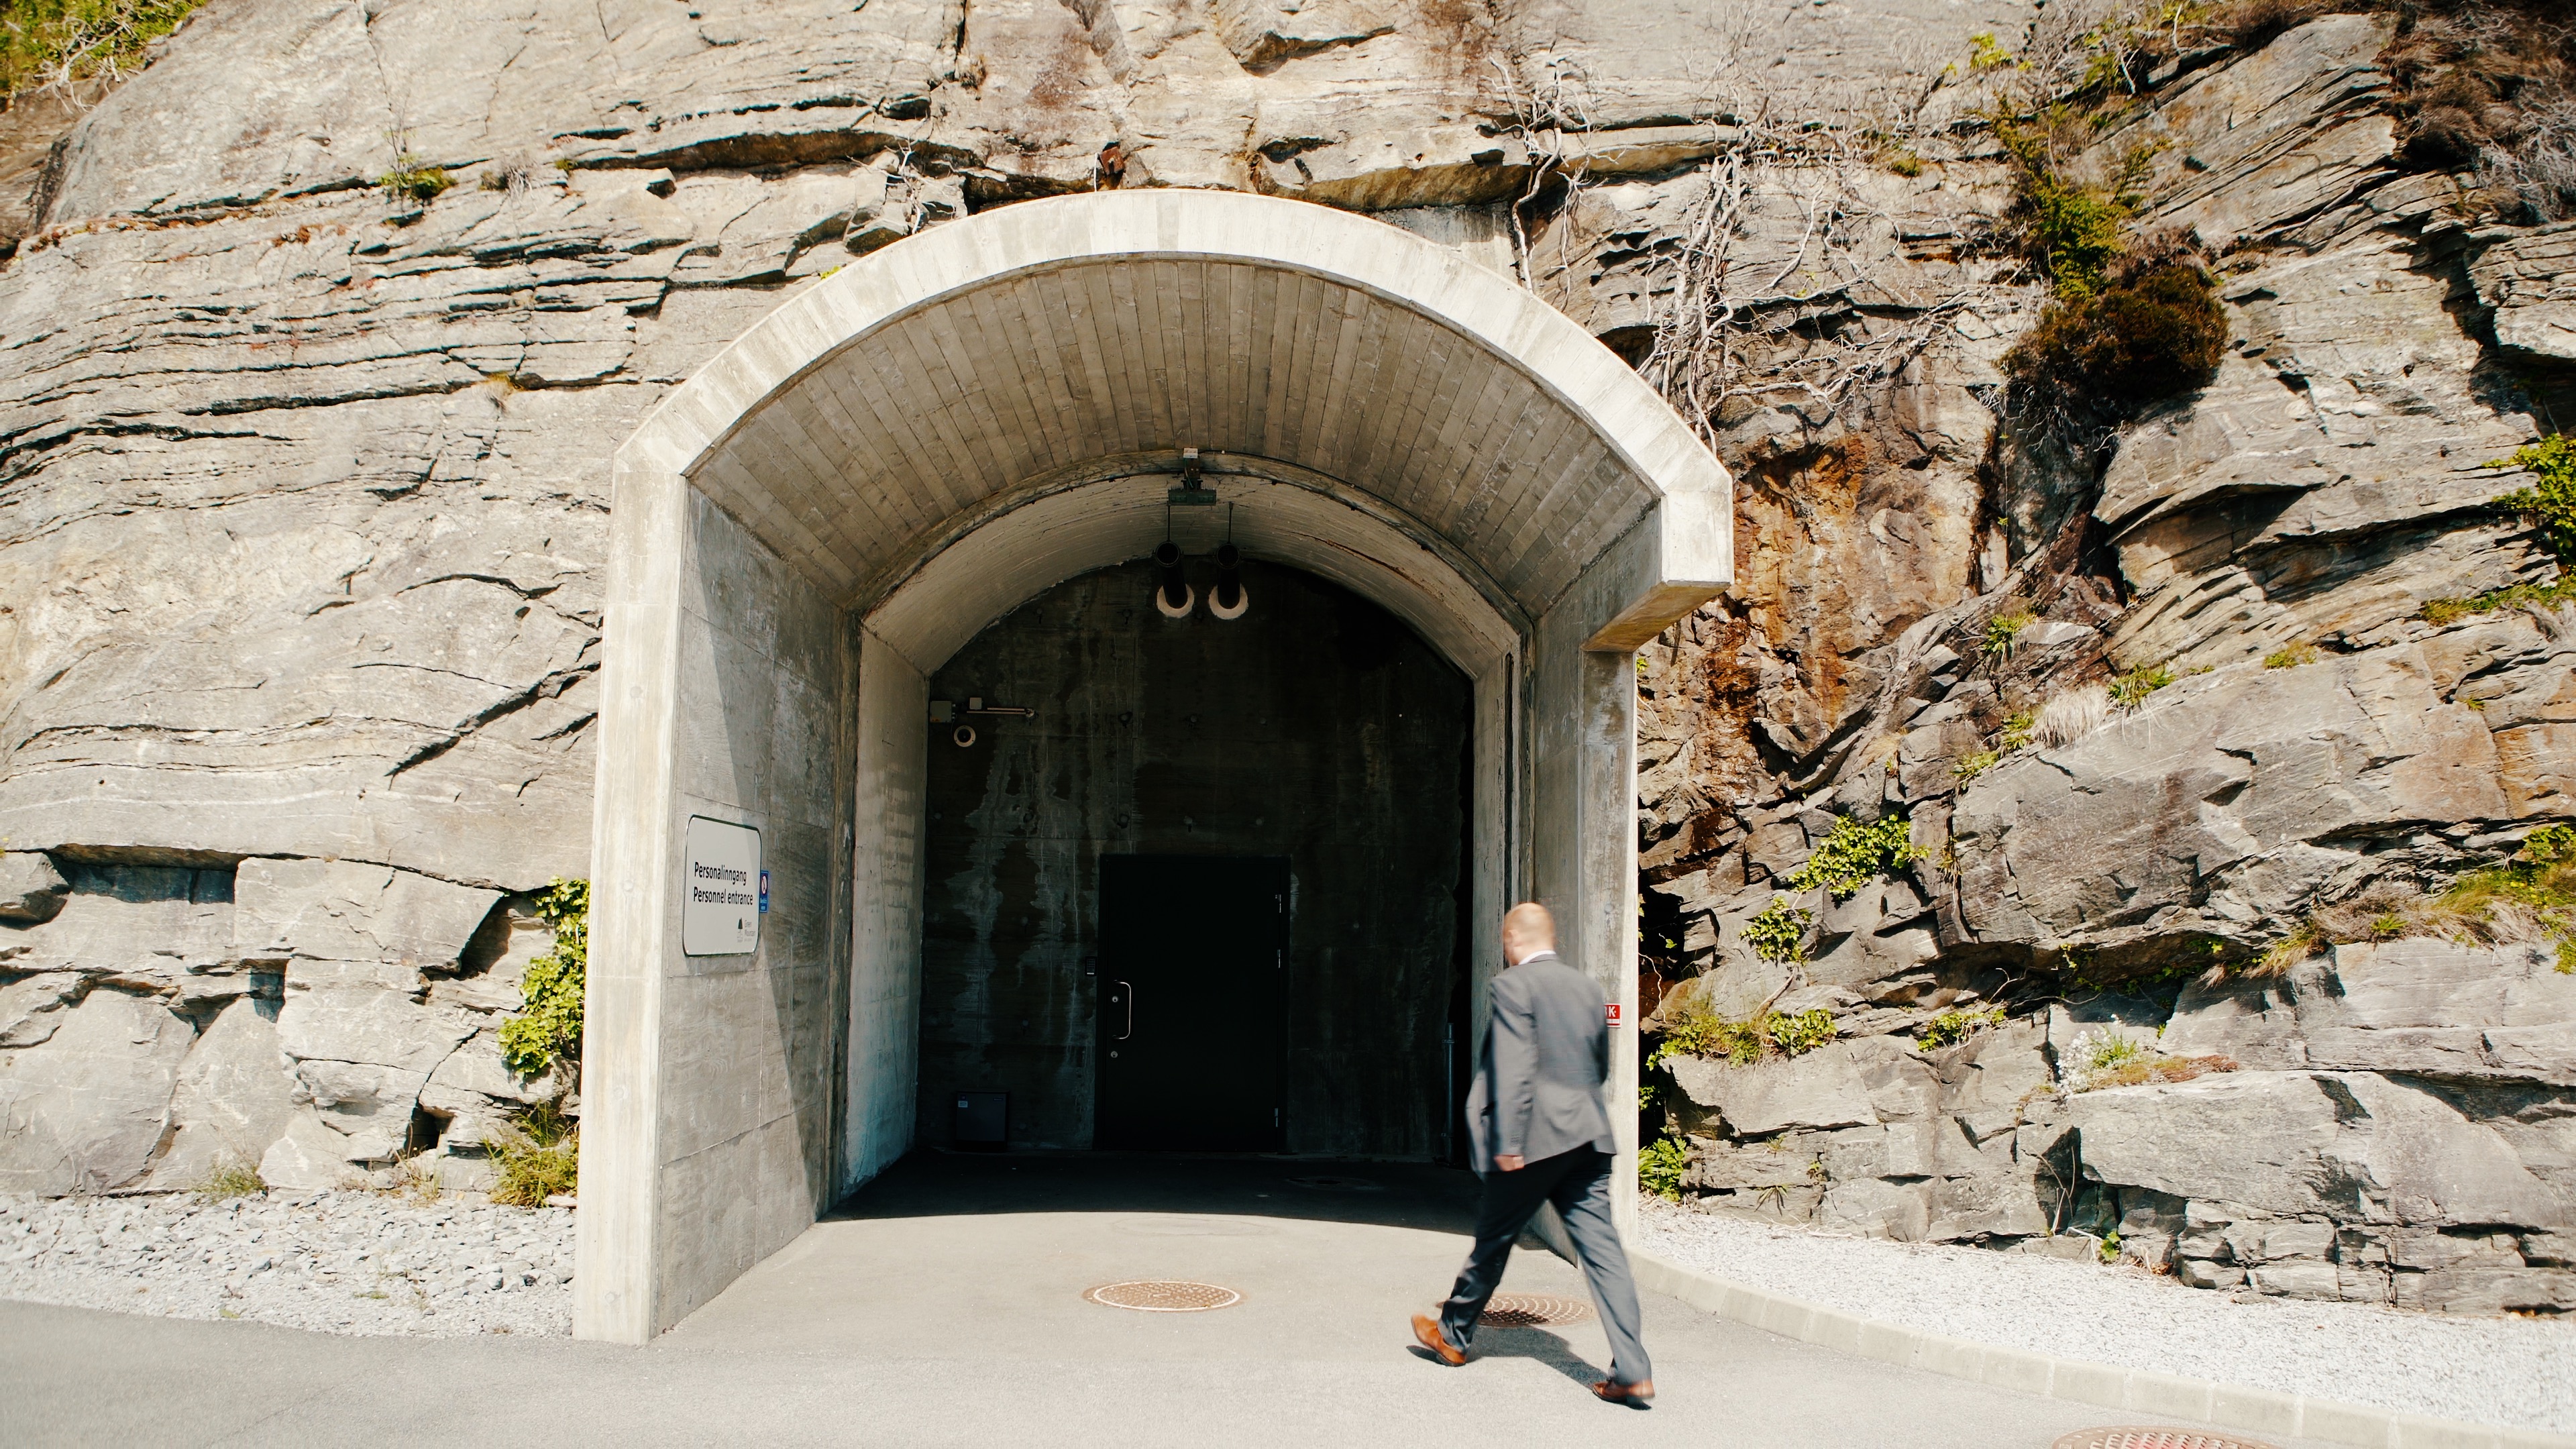 Green Mountin CEO Tor Kristian Gyland at the entrance to Green Mountain high-efficiency data center, located deep inside a Norwegian mountain.